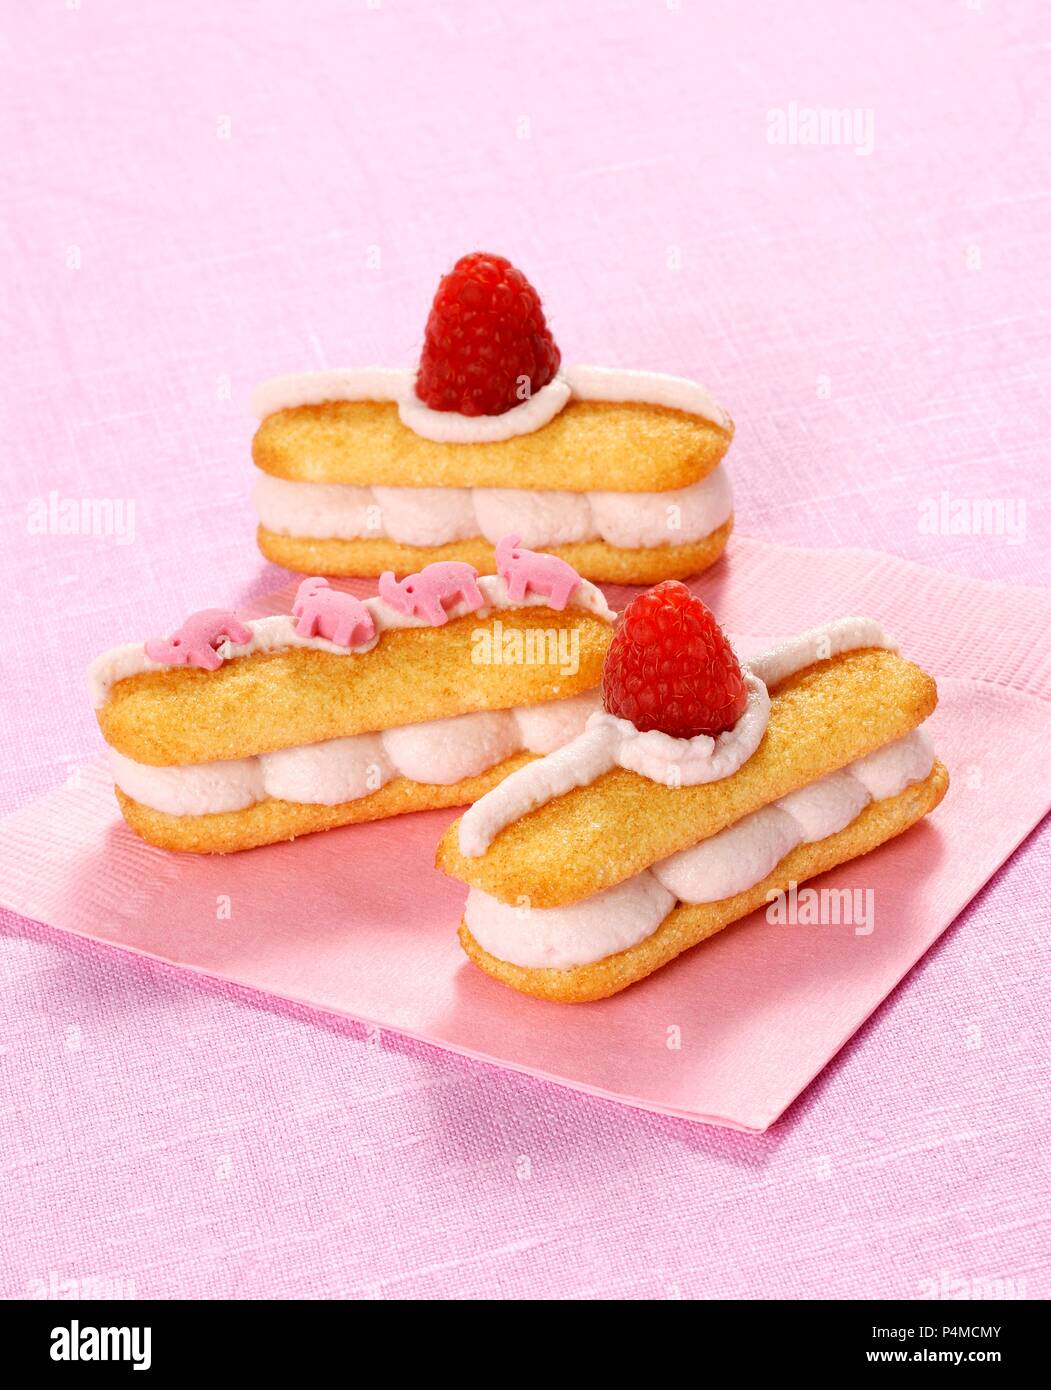 Sponge finger sandwiches with raspberry mousse Stock Photo